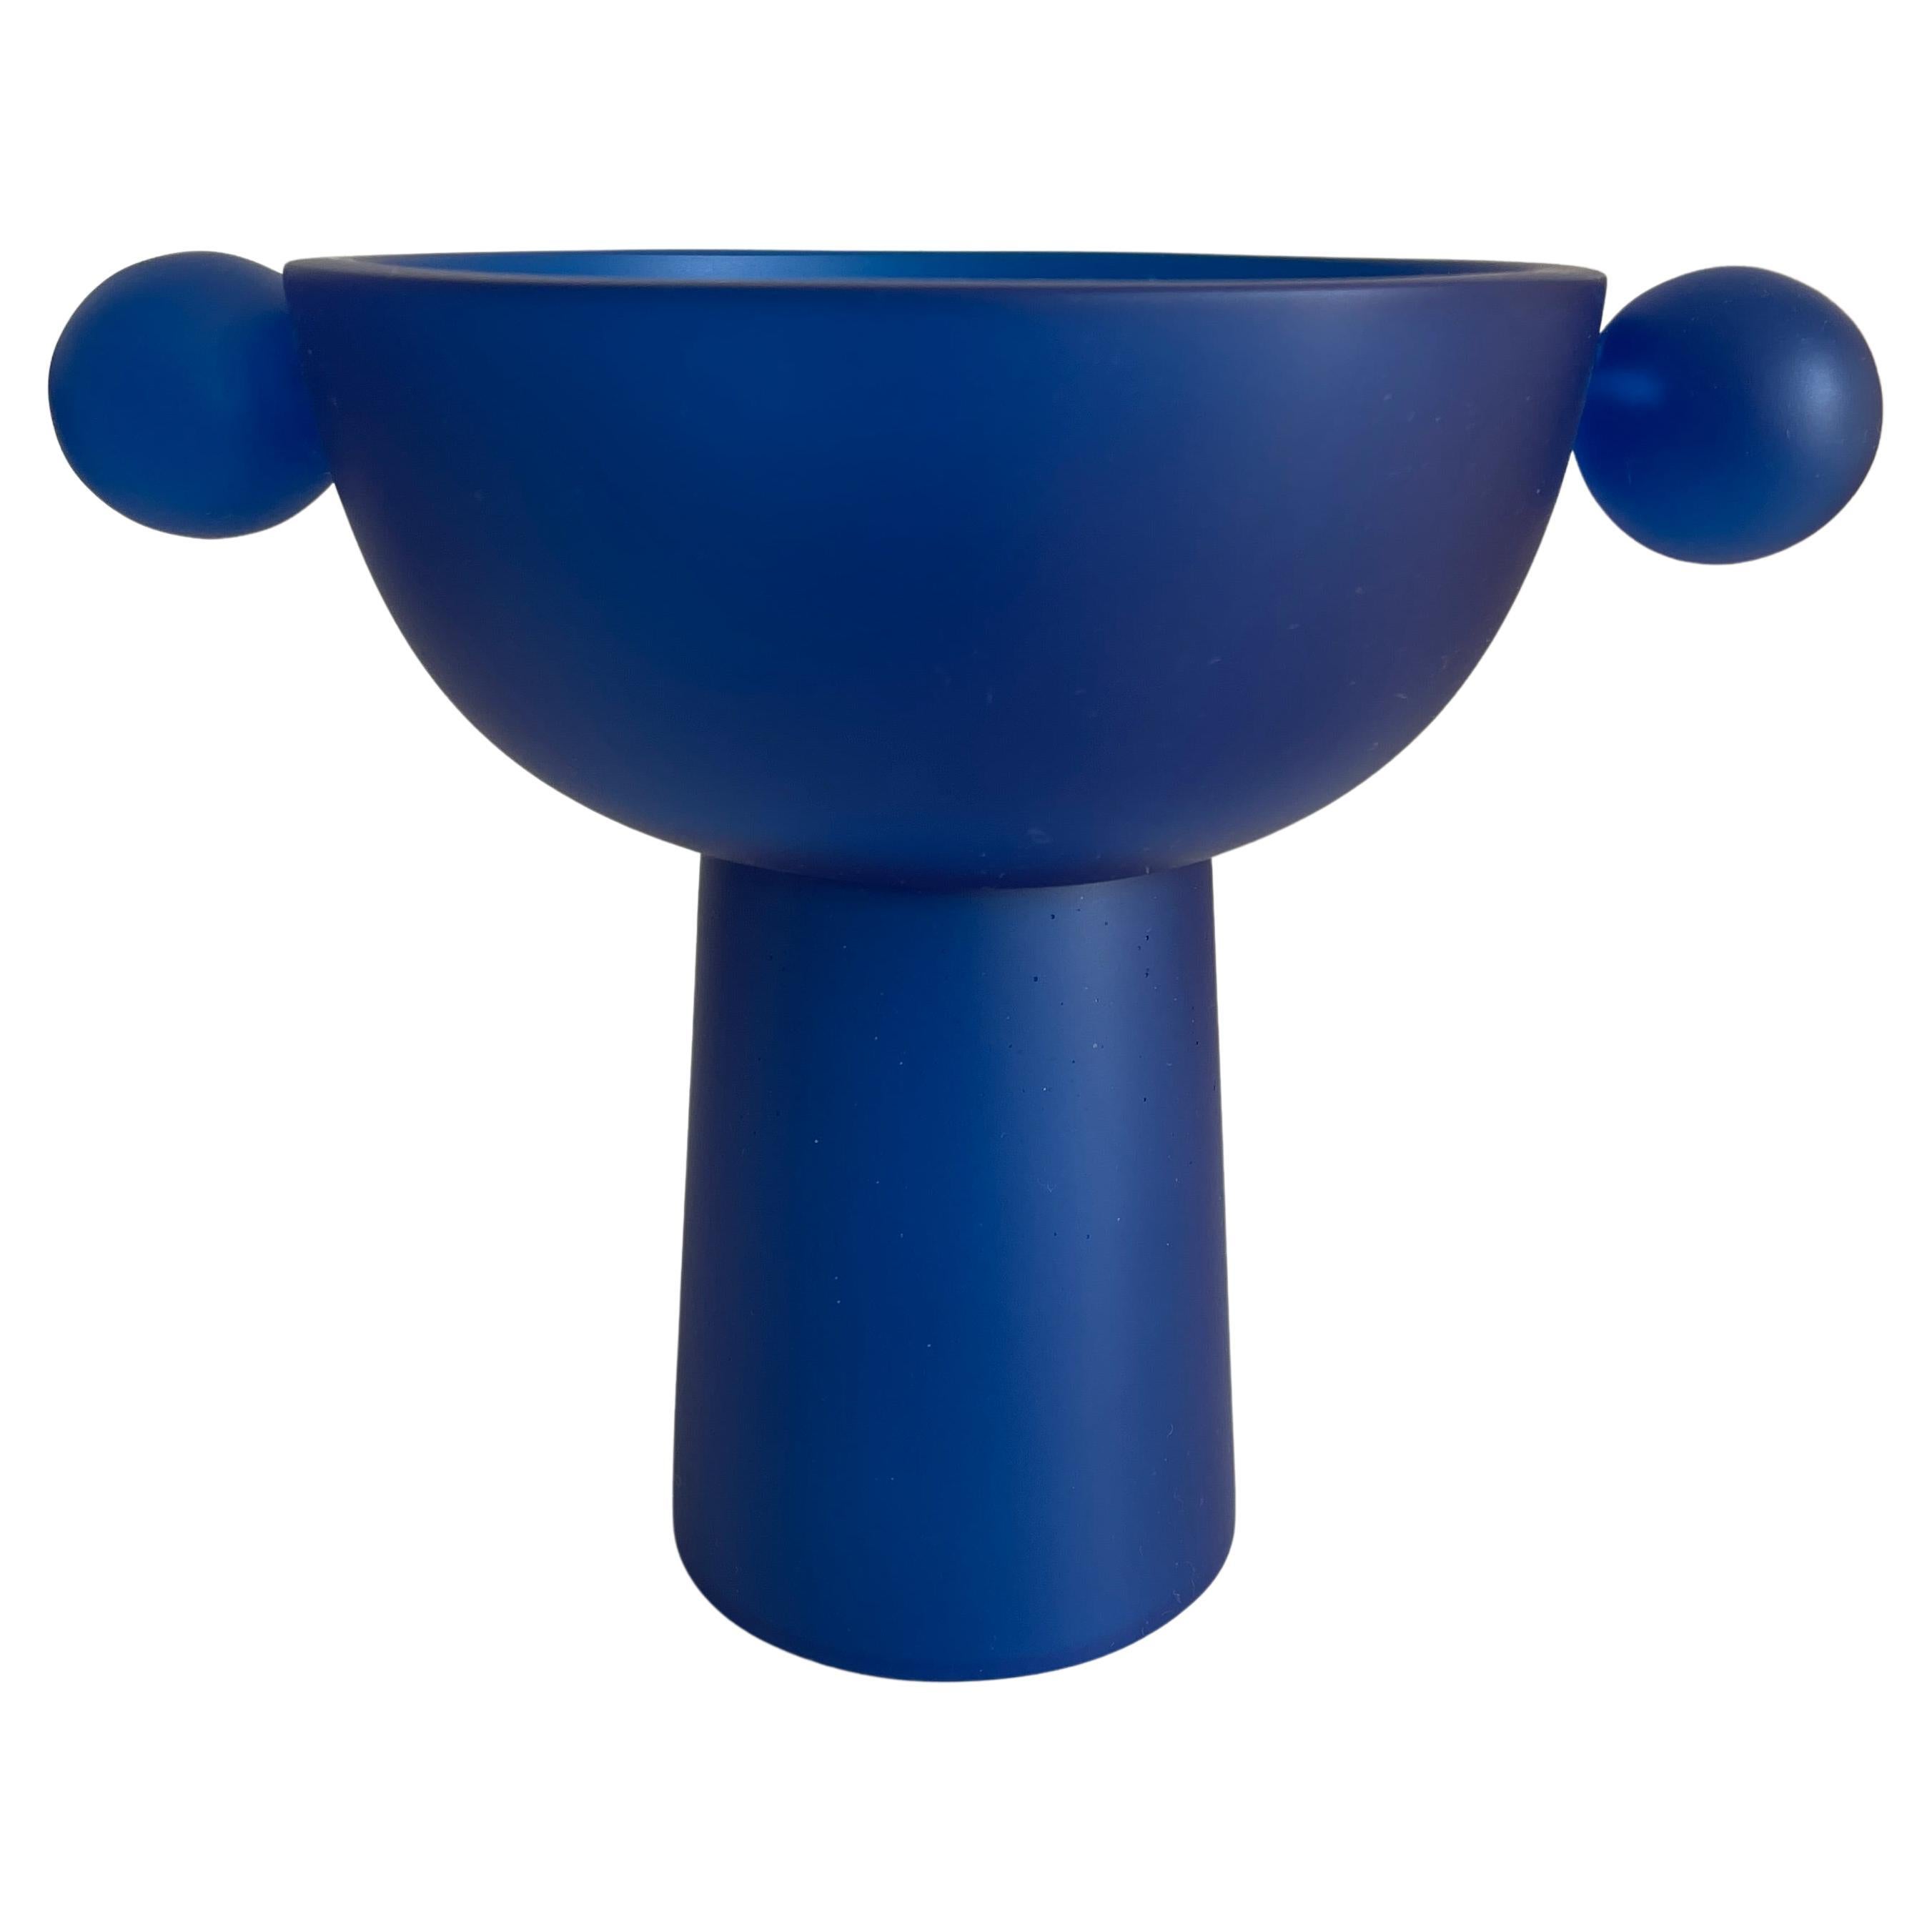 Small Bowl Pedestal in Blue Resin by Paola Valle